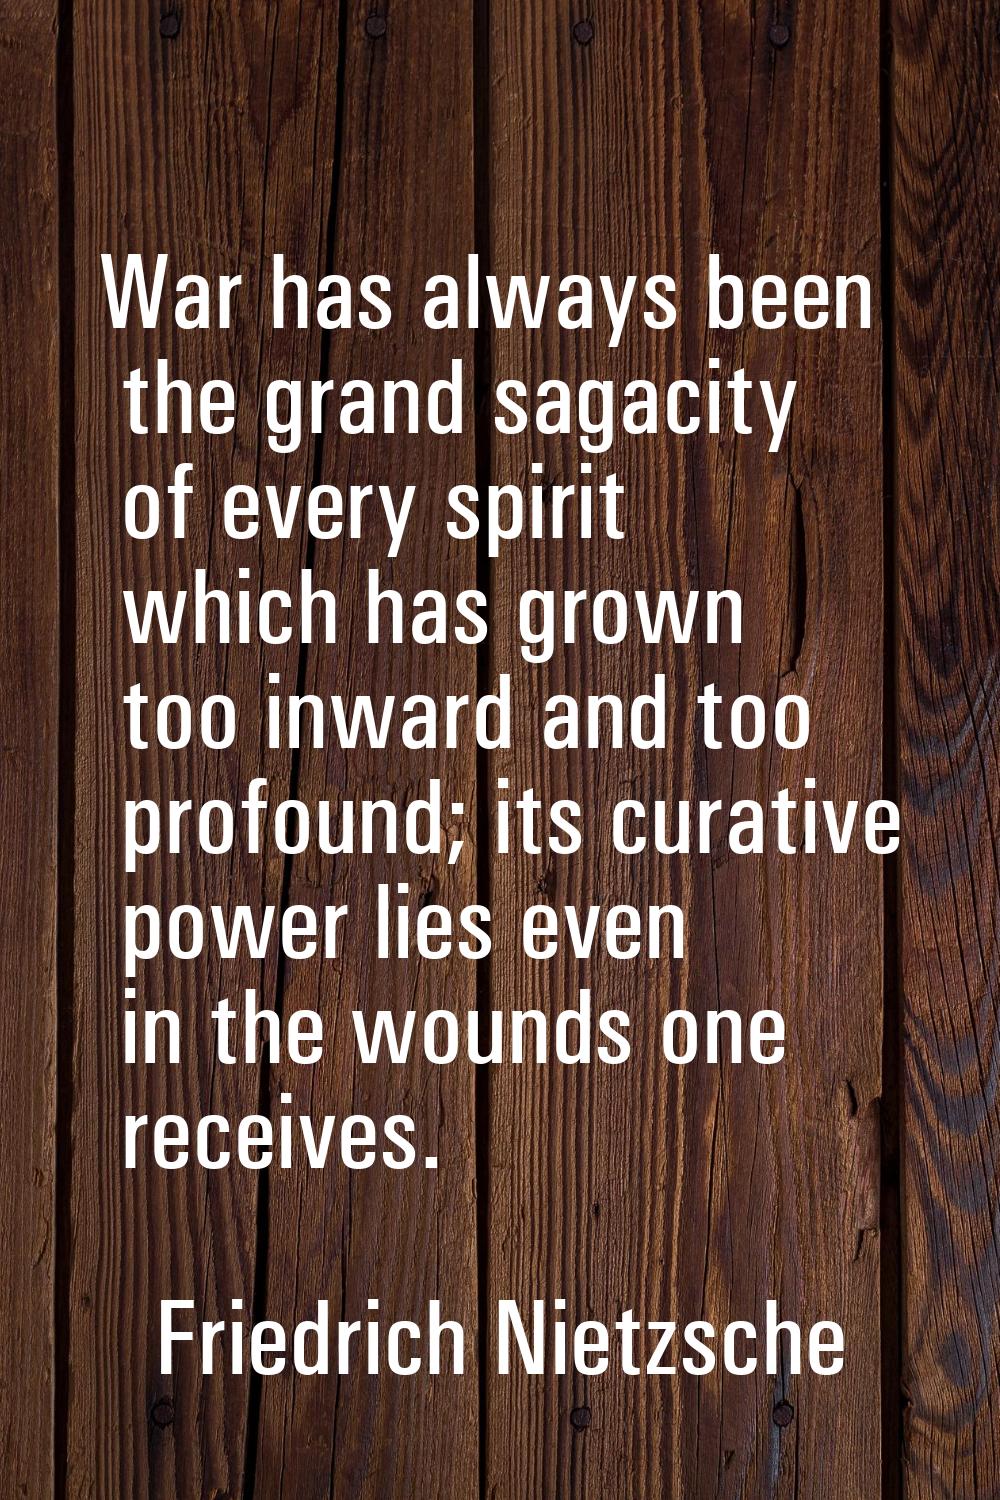 War has always been the grand sagacity of every spirit which has grown too inward and too profound;